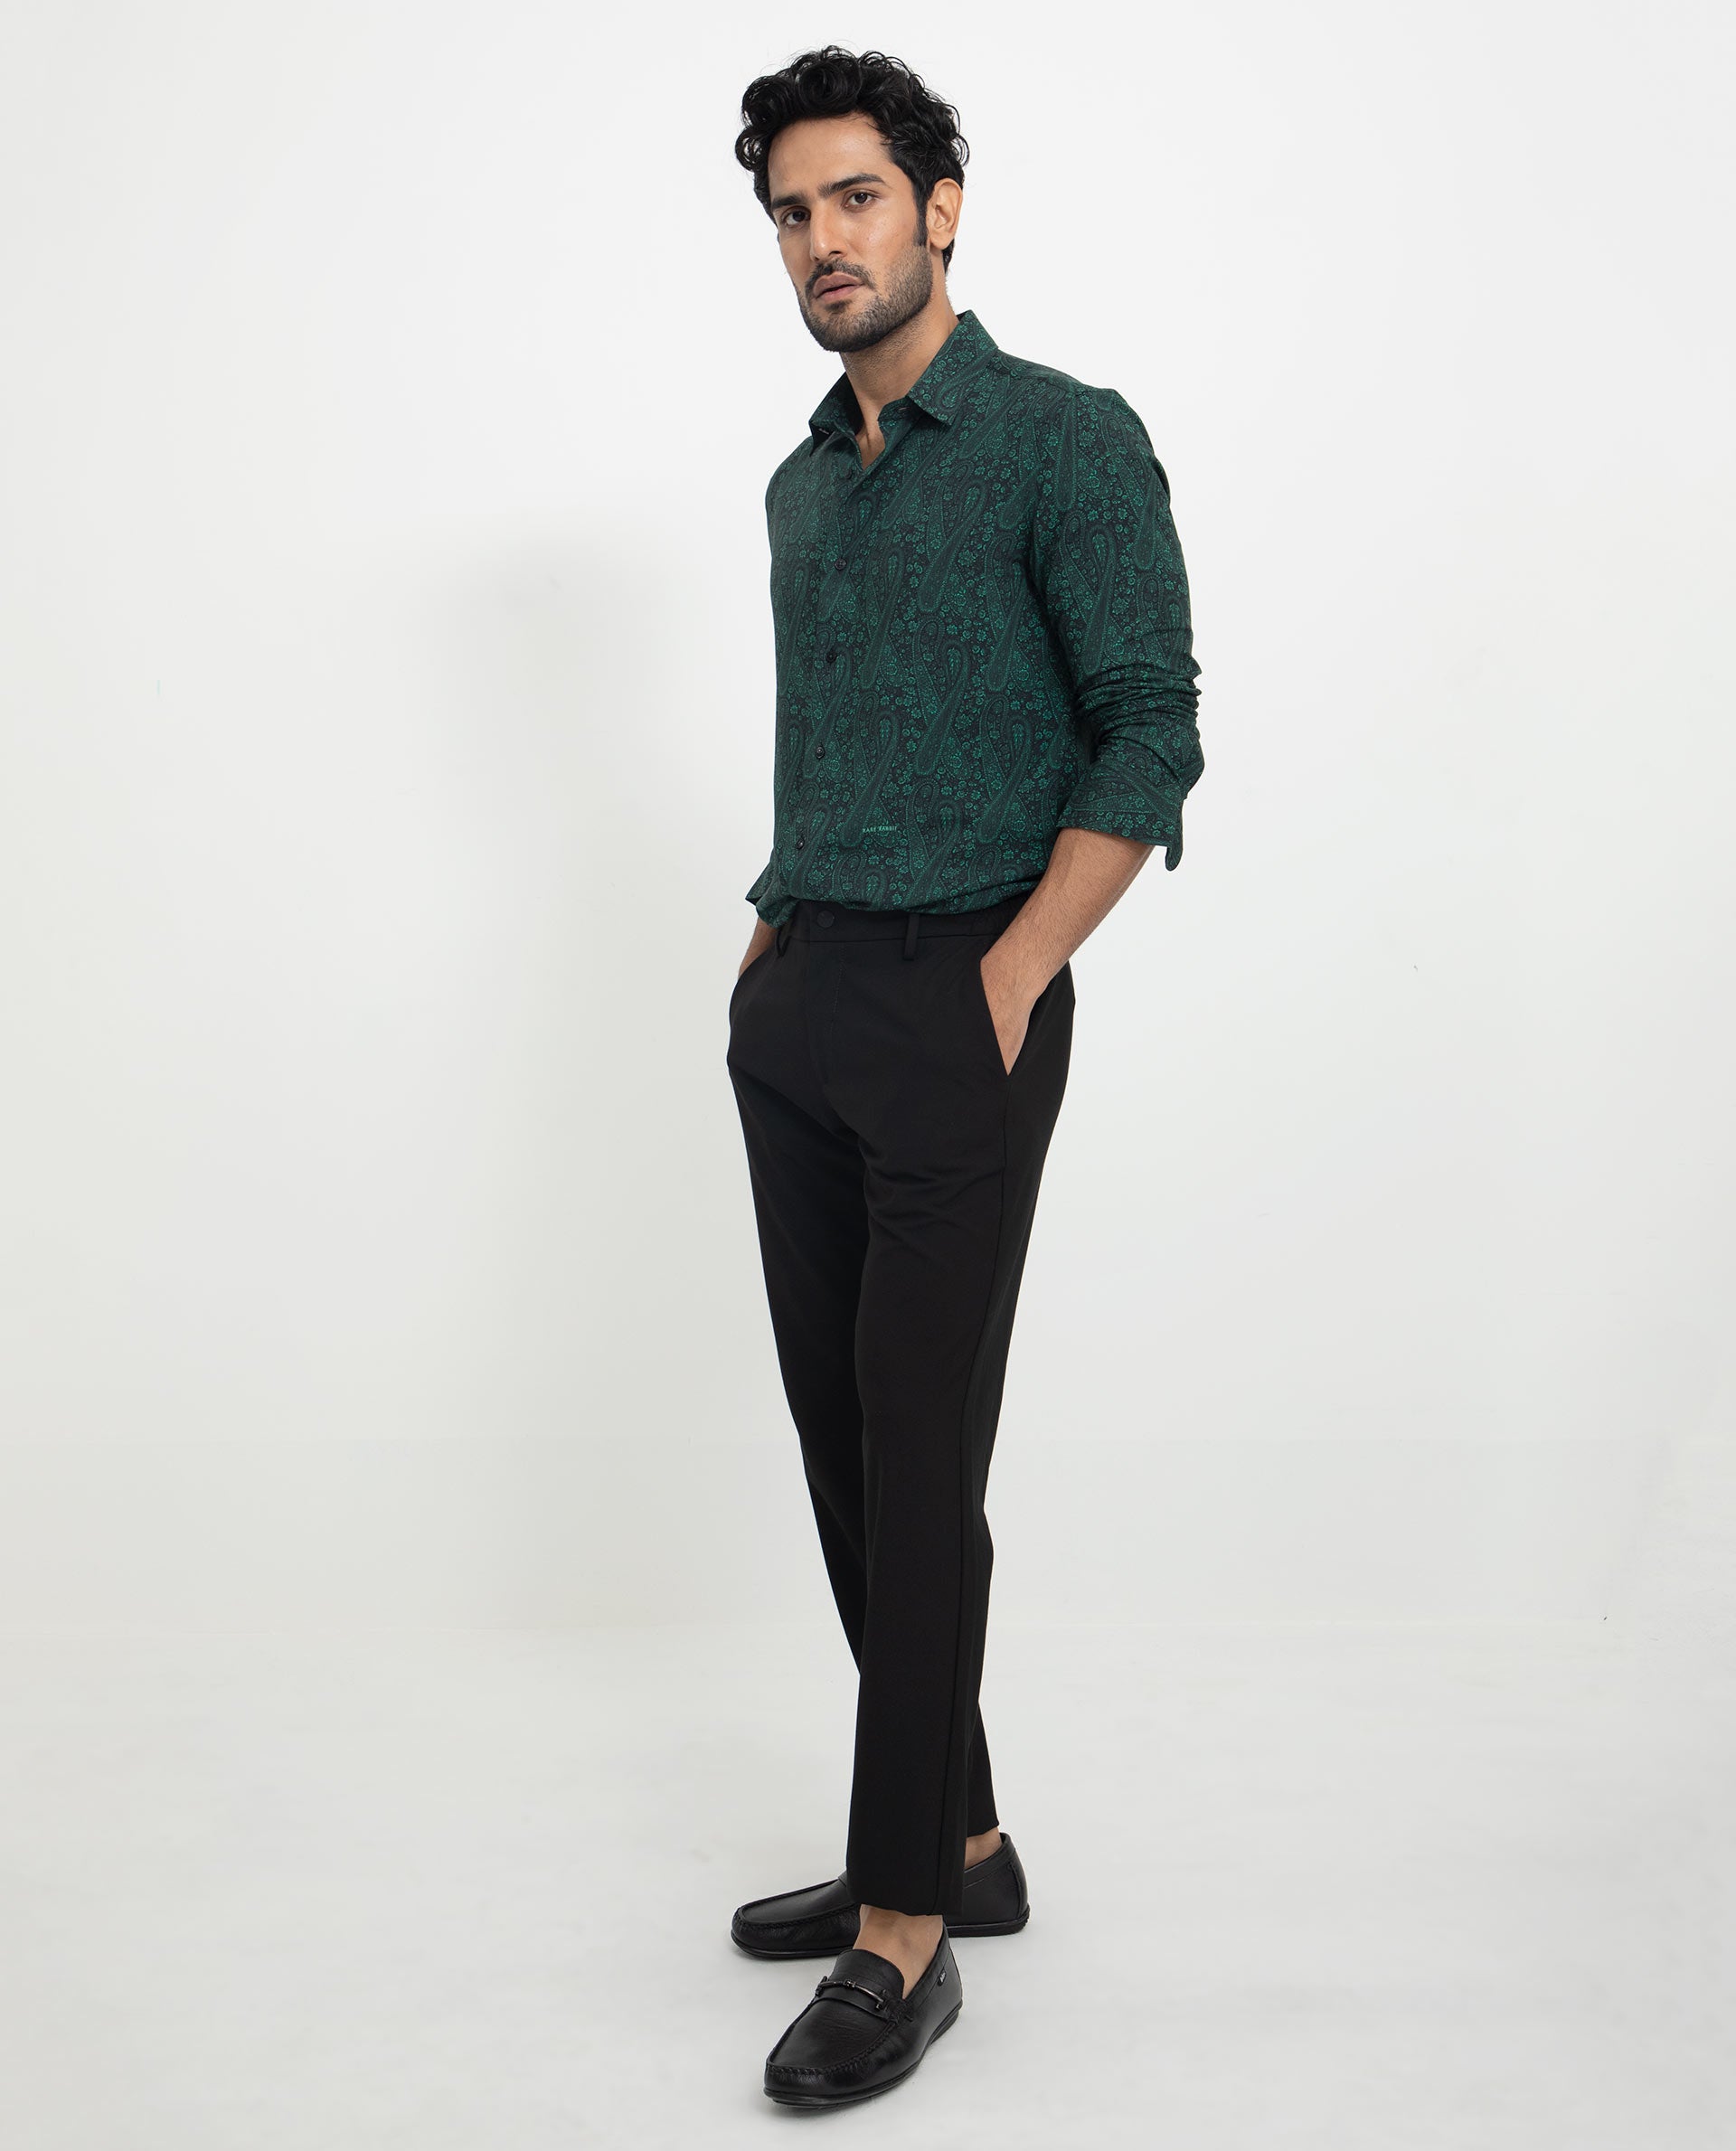 Shirts - Buy from Latest Collection of Shirt Online at Best Price | Myntra